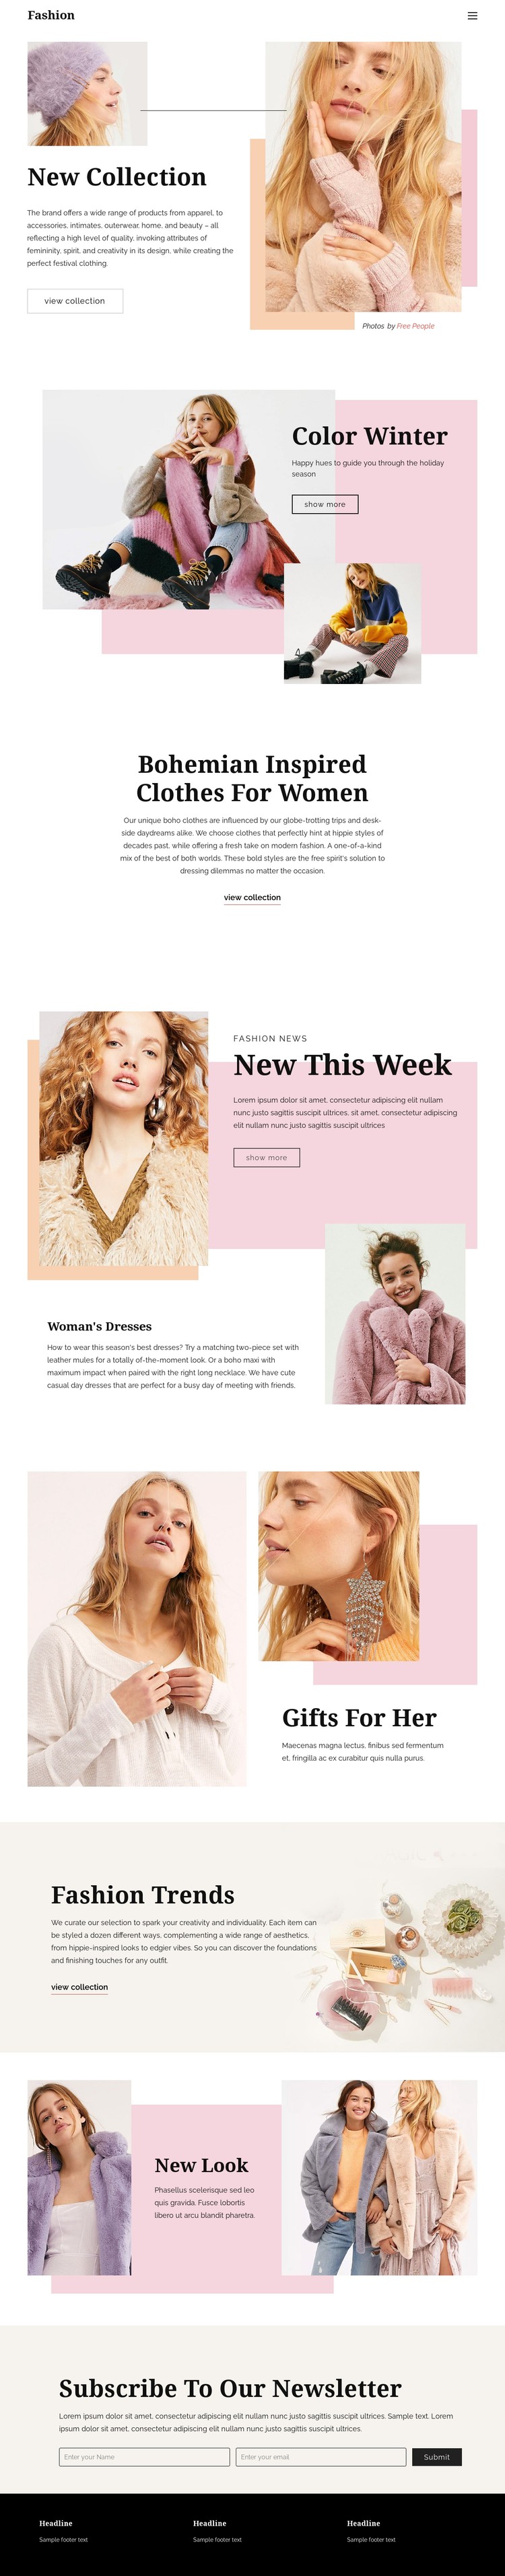 Fashion Page Design CSS Template